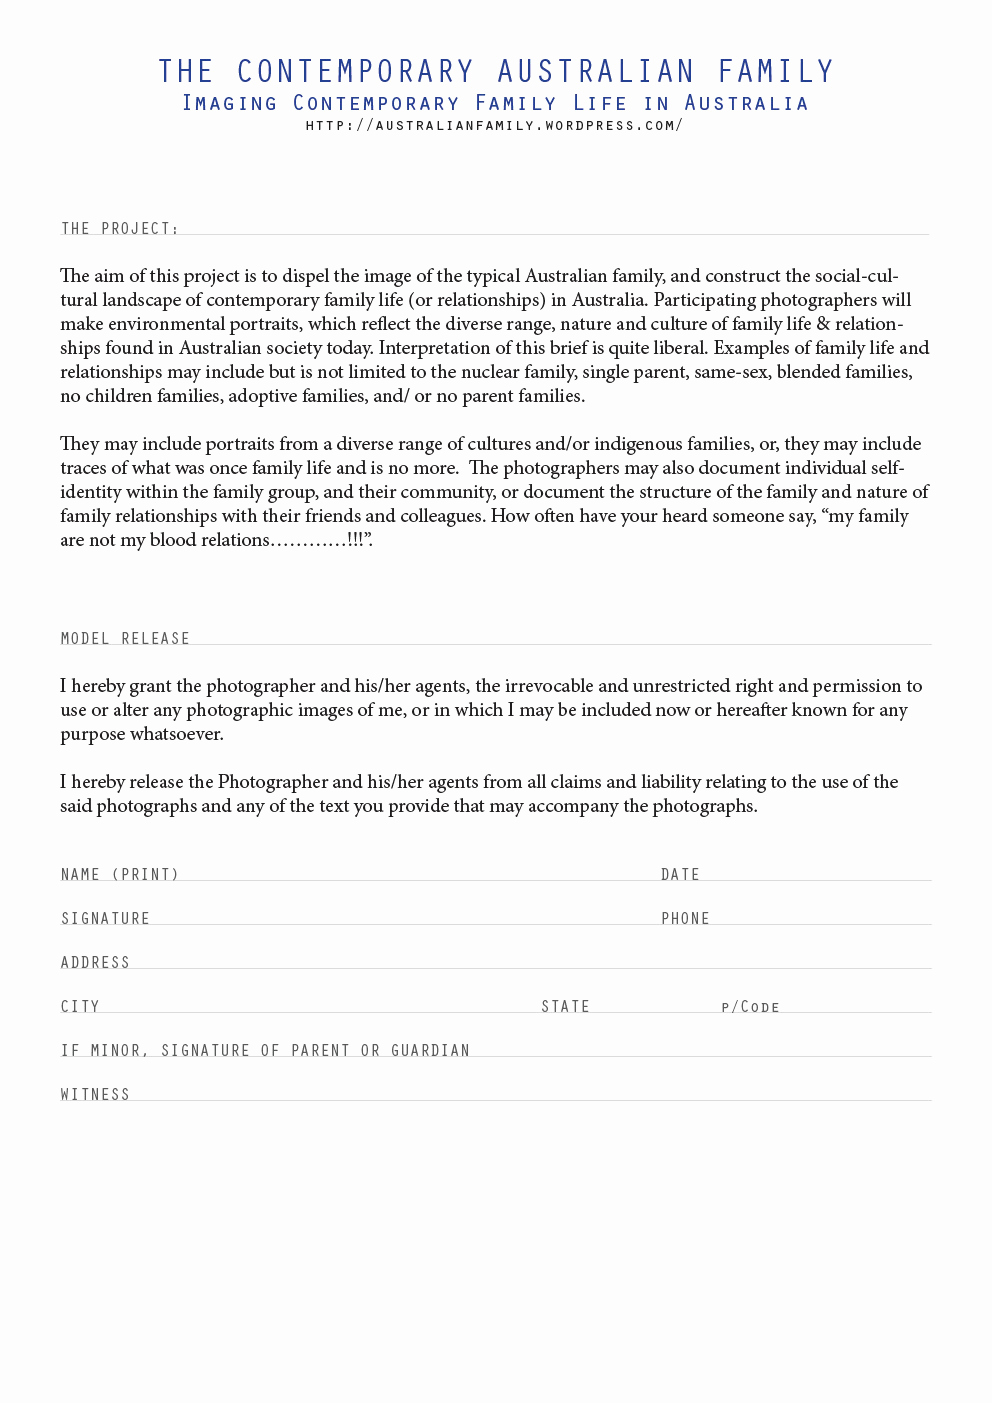 Photography Model Release form Fresh Grapher’s Model Release form